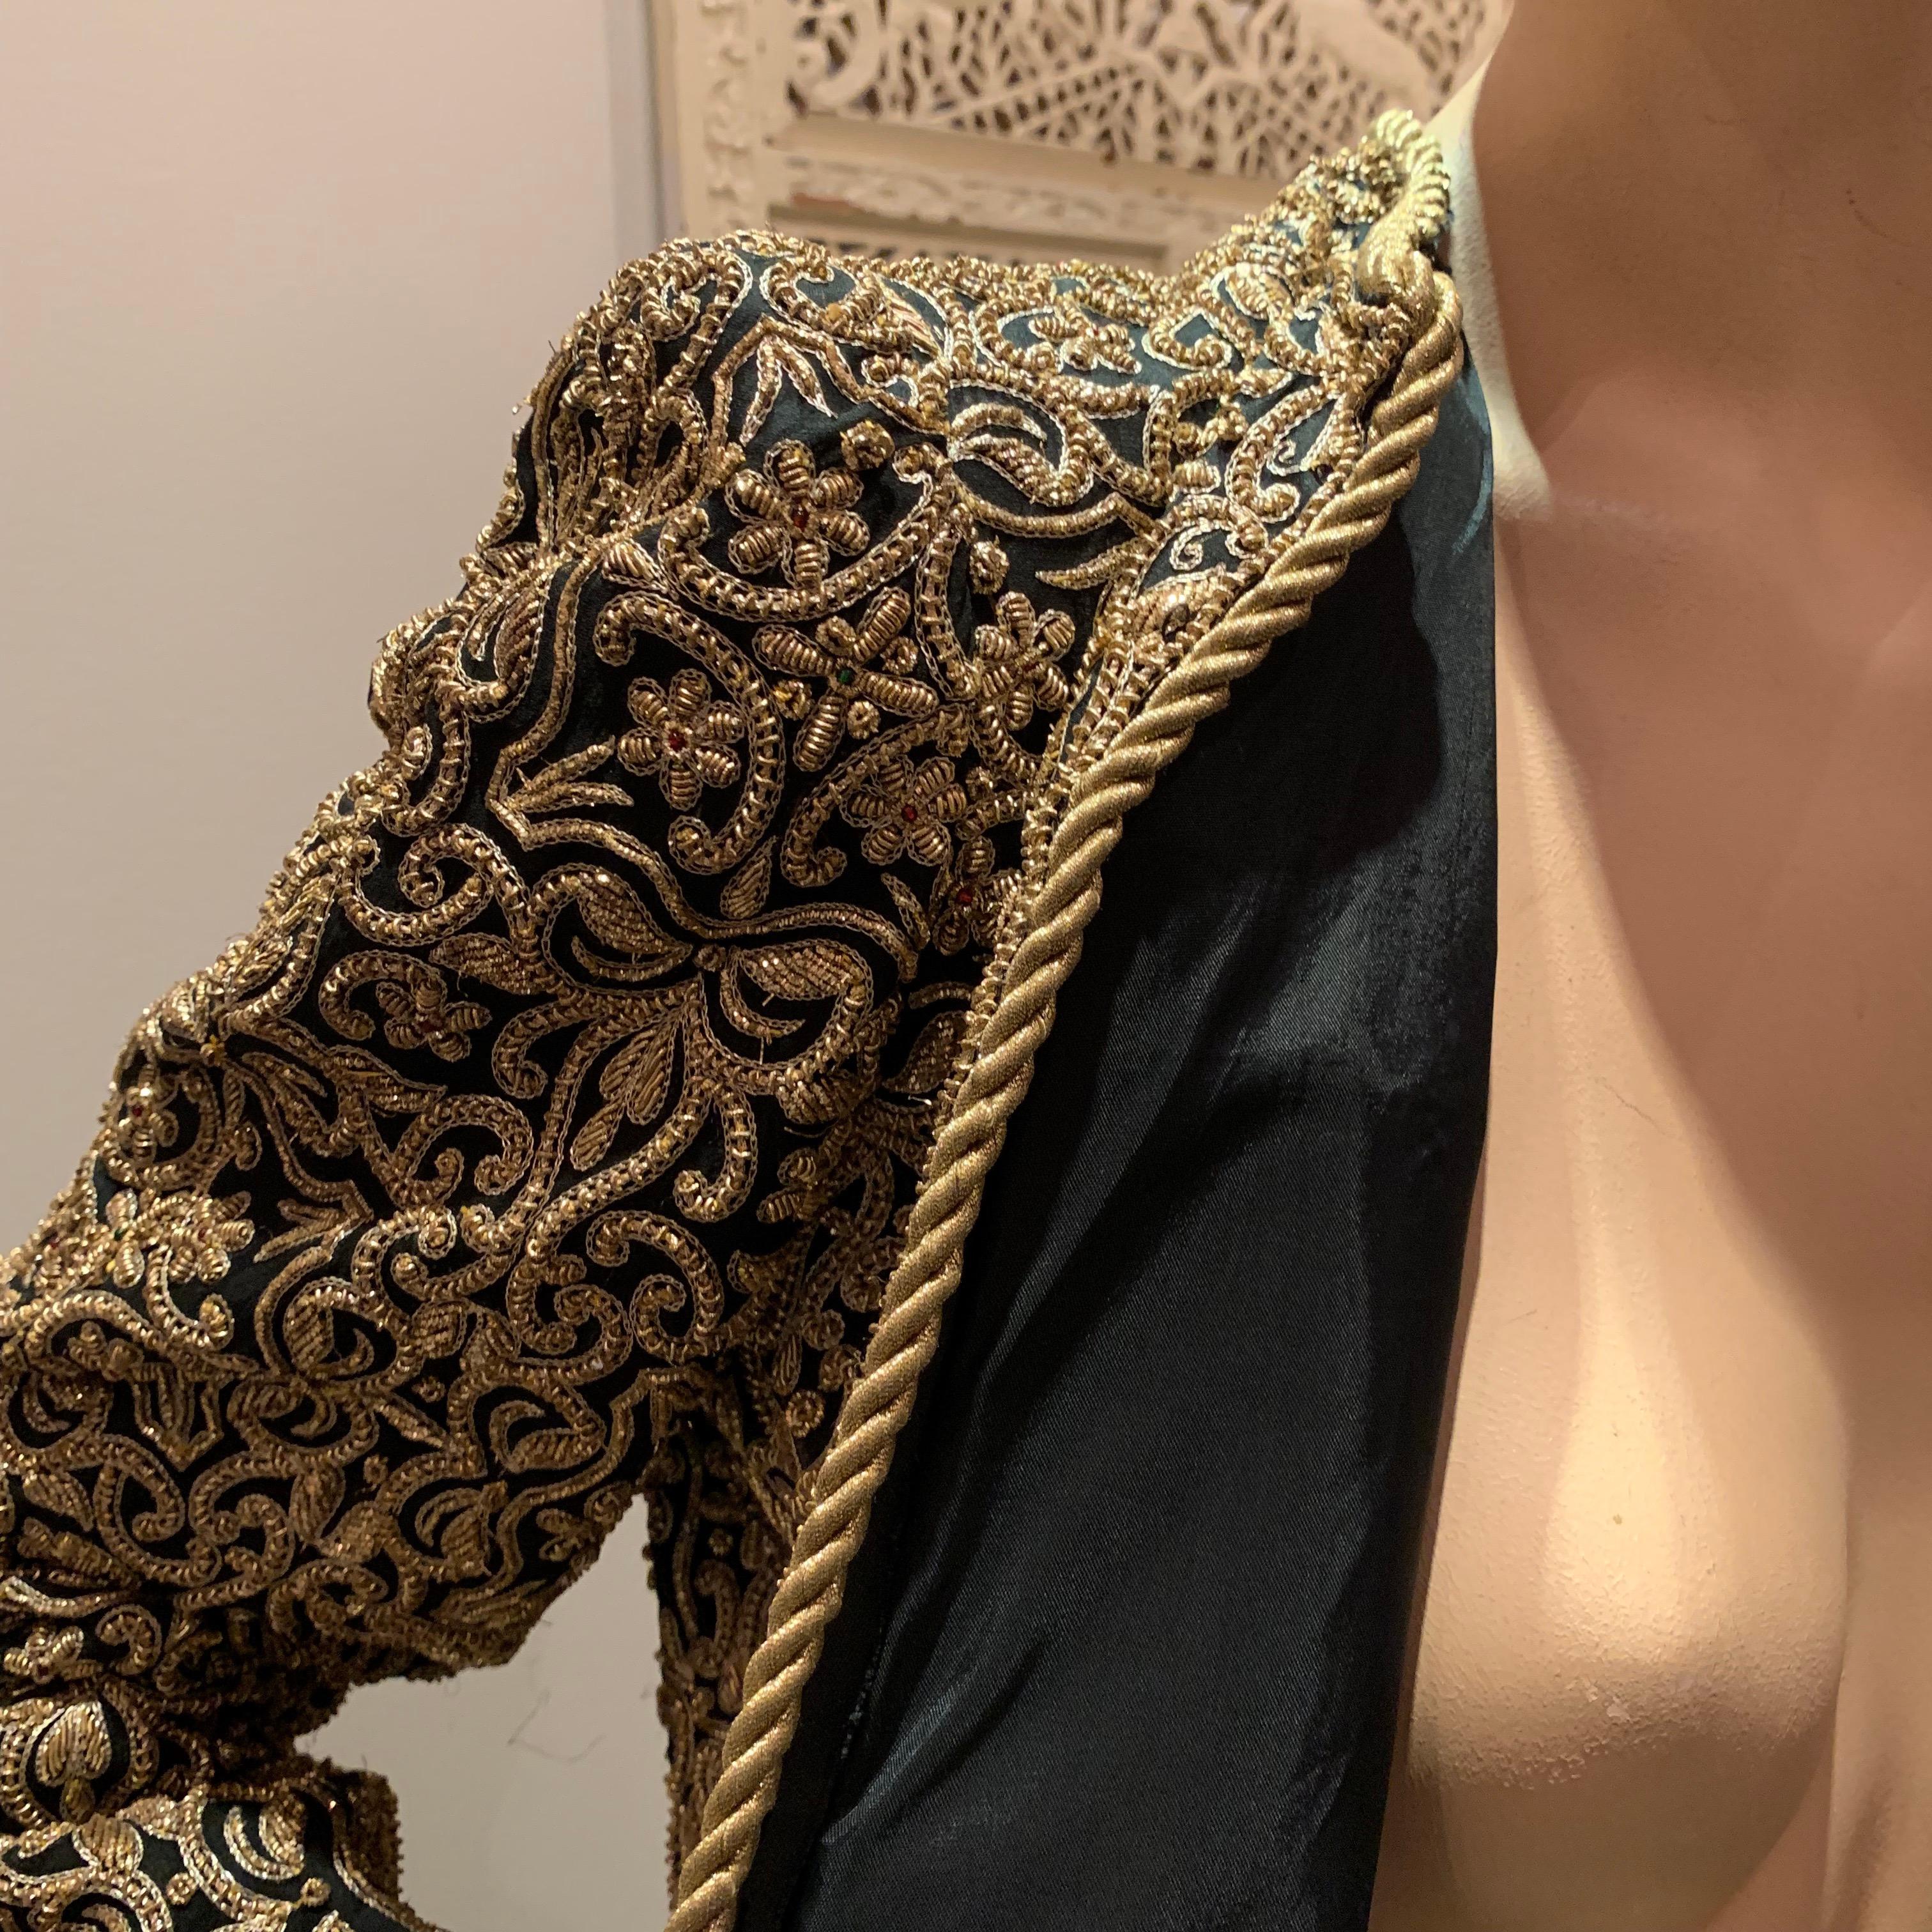 1980s  Bill Blass Evening Jacket W/ Heavily Encrusted Chain Embriodery Gold Work For Sale 8